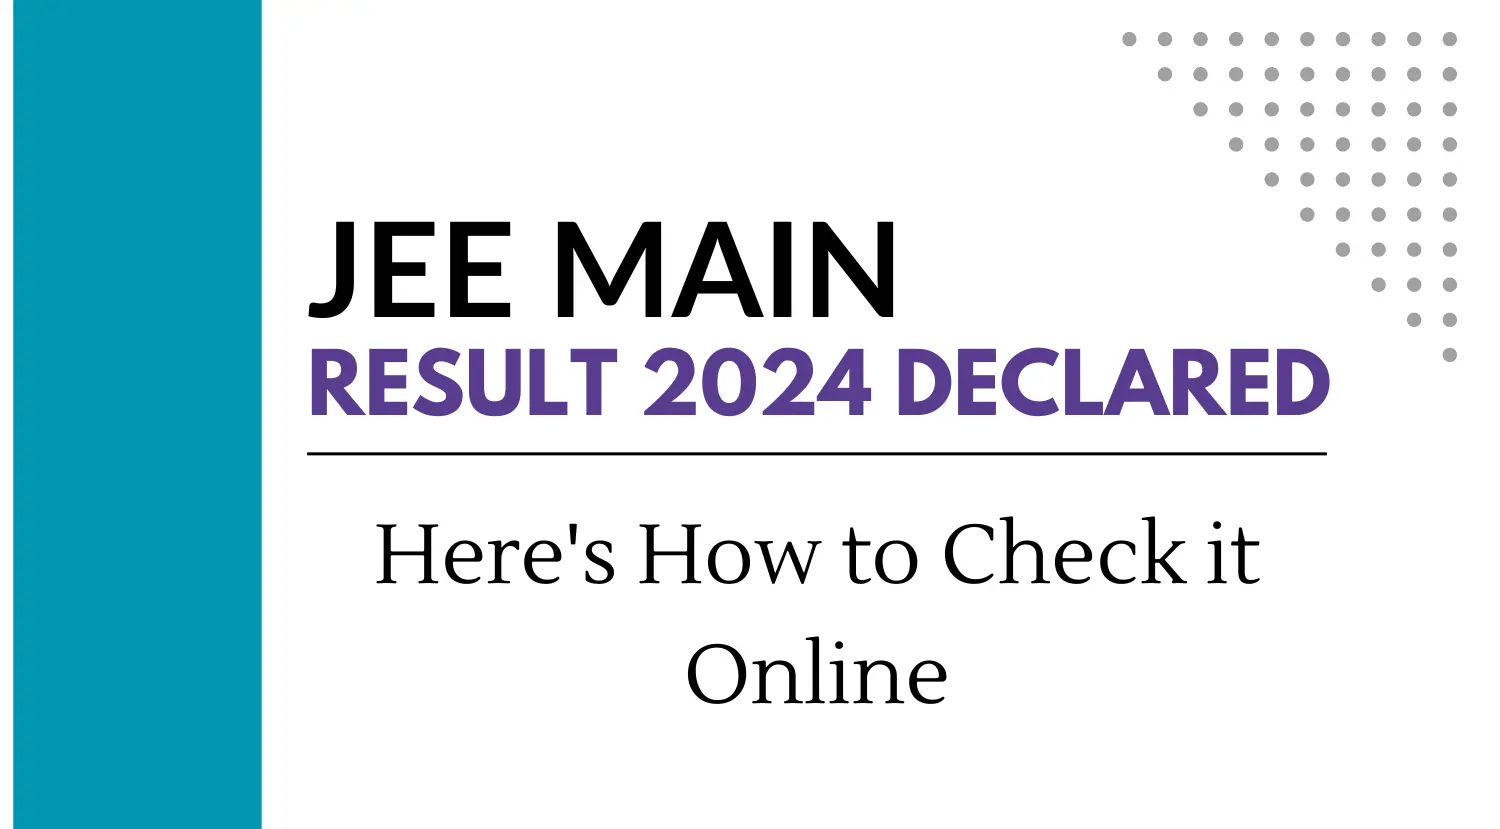 JEE Main Result 2024 Declared - Heres How to Check it Online